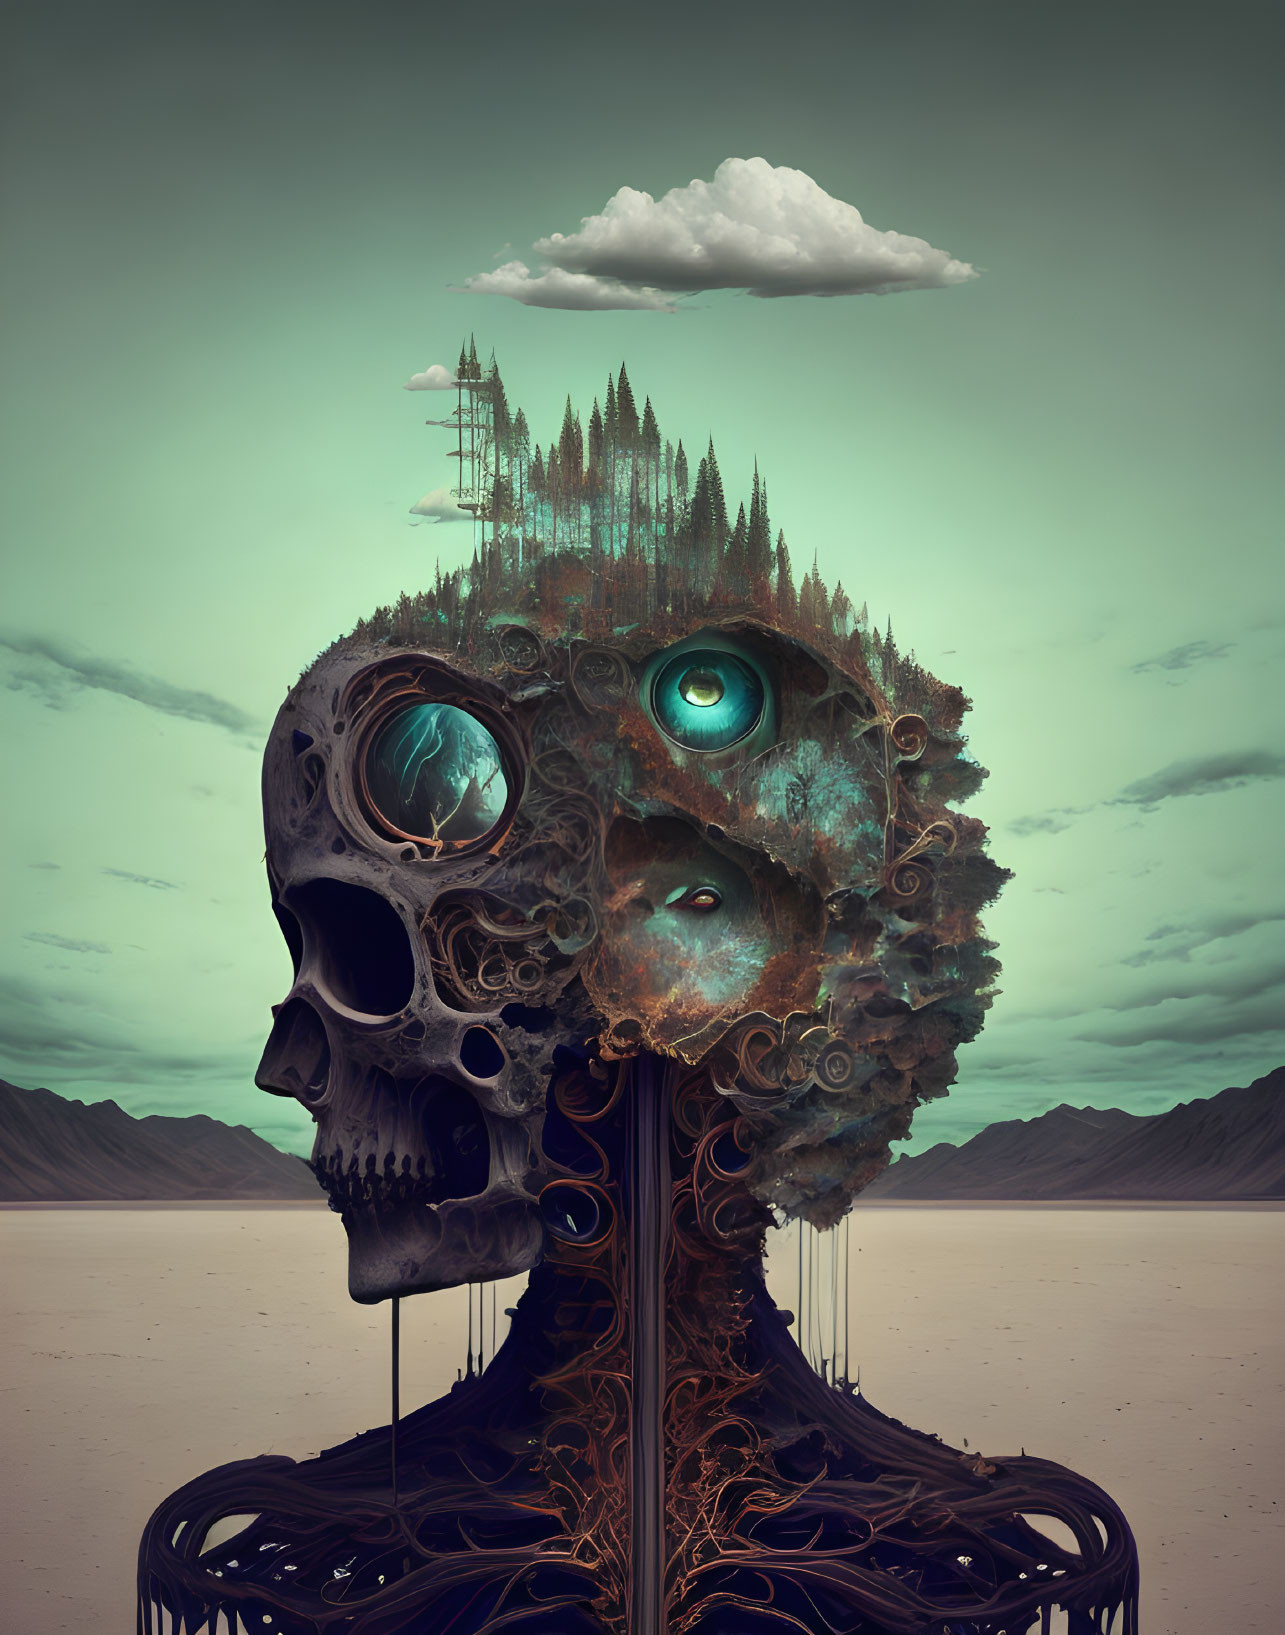 Human skull intertwined with nature elements and ornate patterns in surreal artwork.